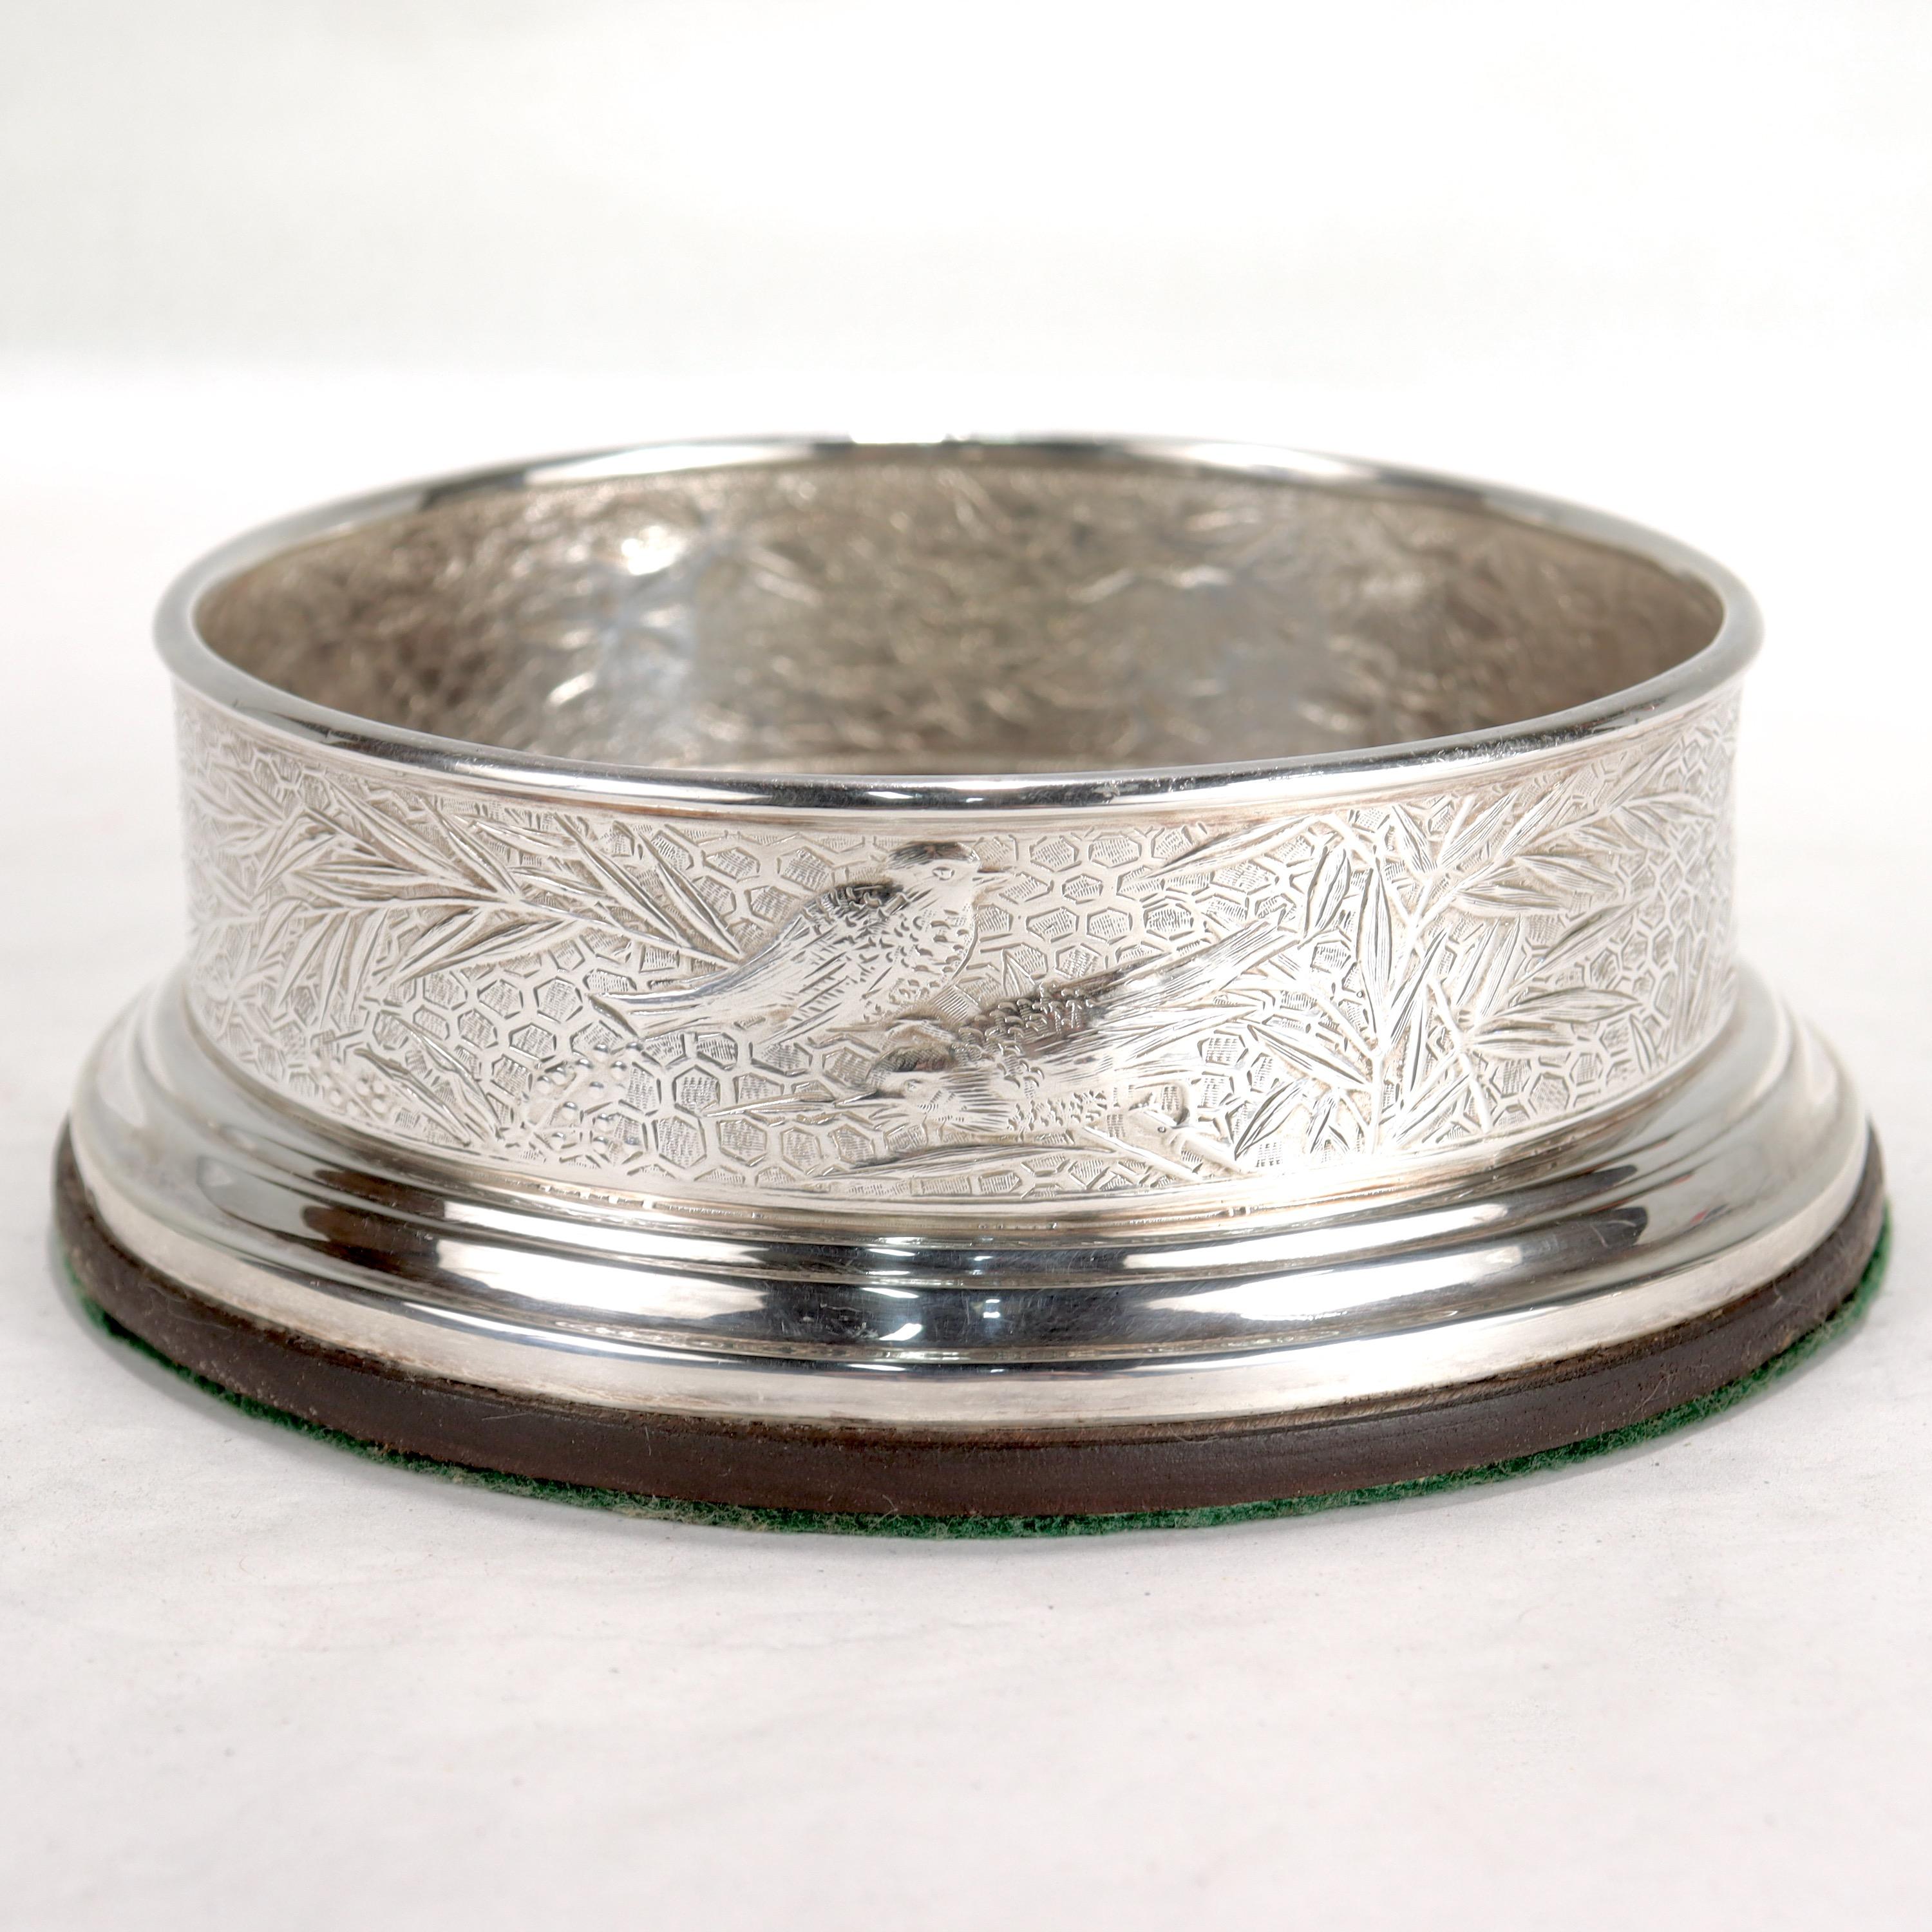 A very fine sterling silver wine coaster.

By Tiffany & Co.

In the Audubon pattern.

With etched floral & honeycomb decoration throughout that incorporates flowers, spiderwebs, and birds.

With a felt pad to the base. 

Marked to the side of the